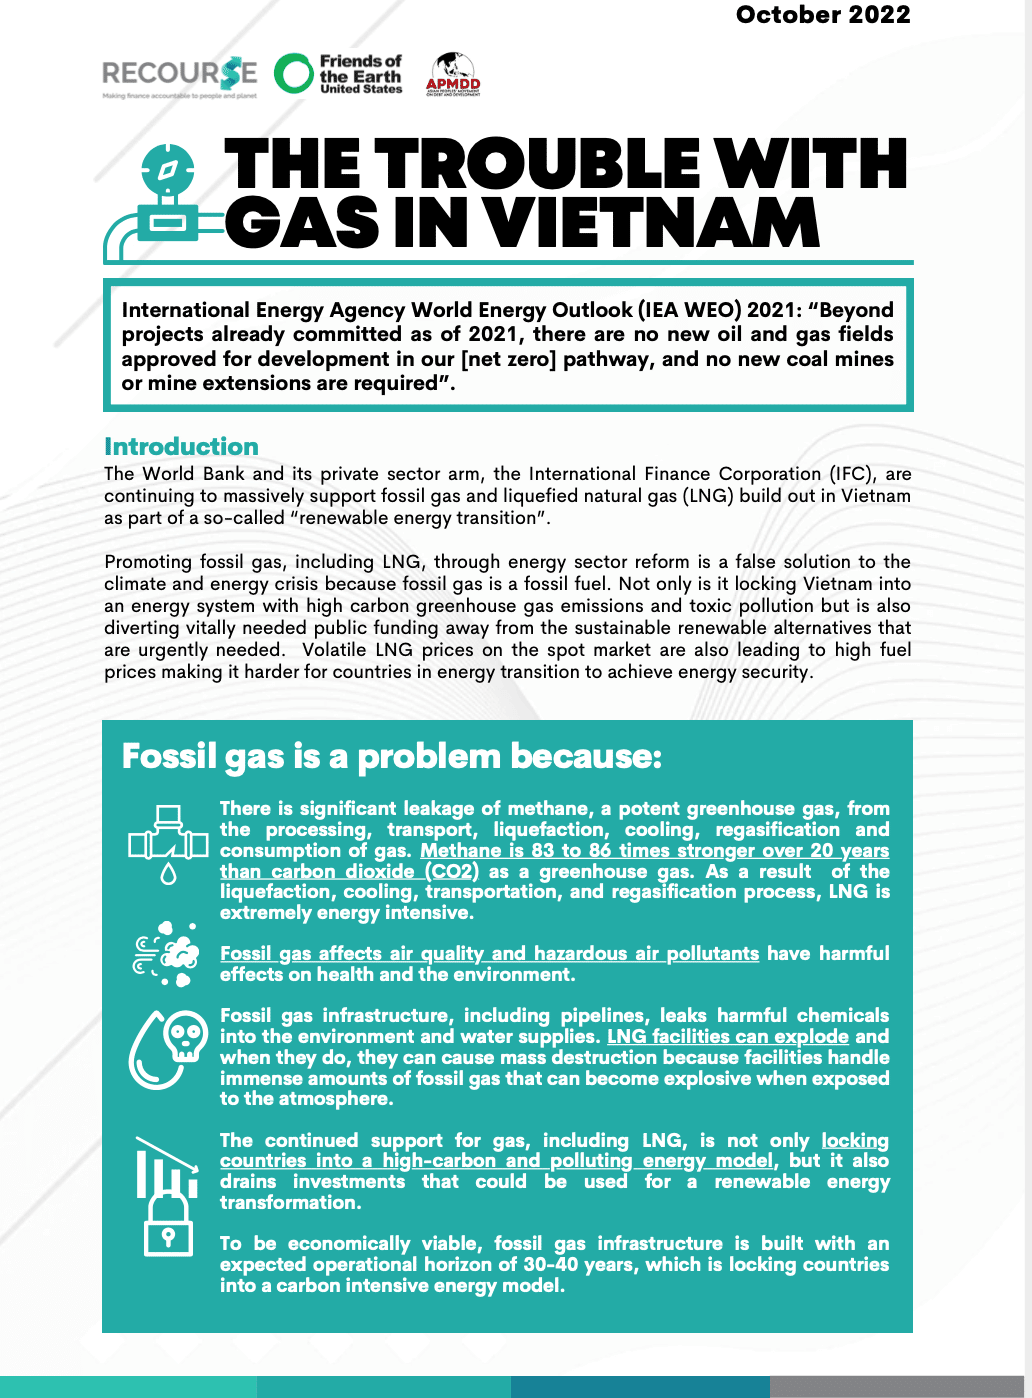 The Trouble With Gas in Vietnam